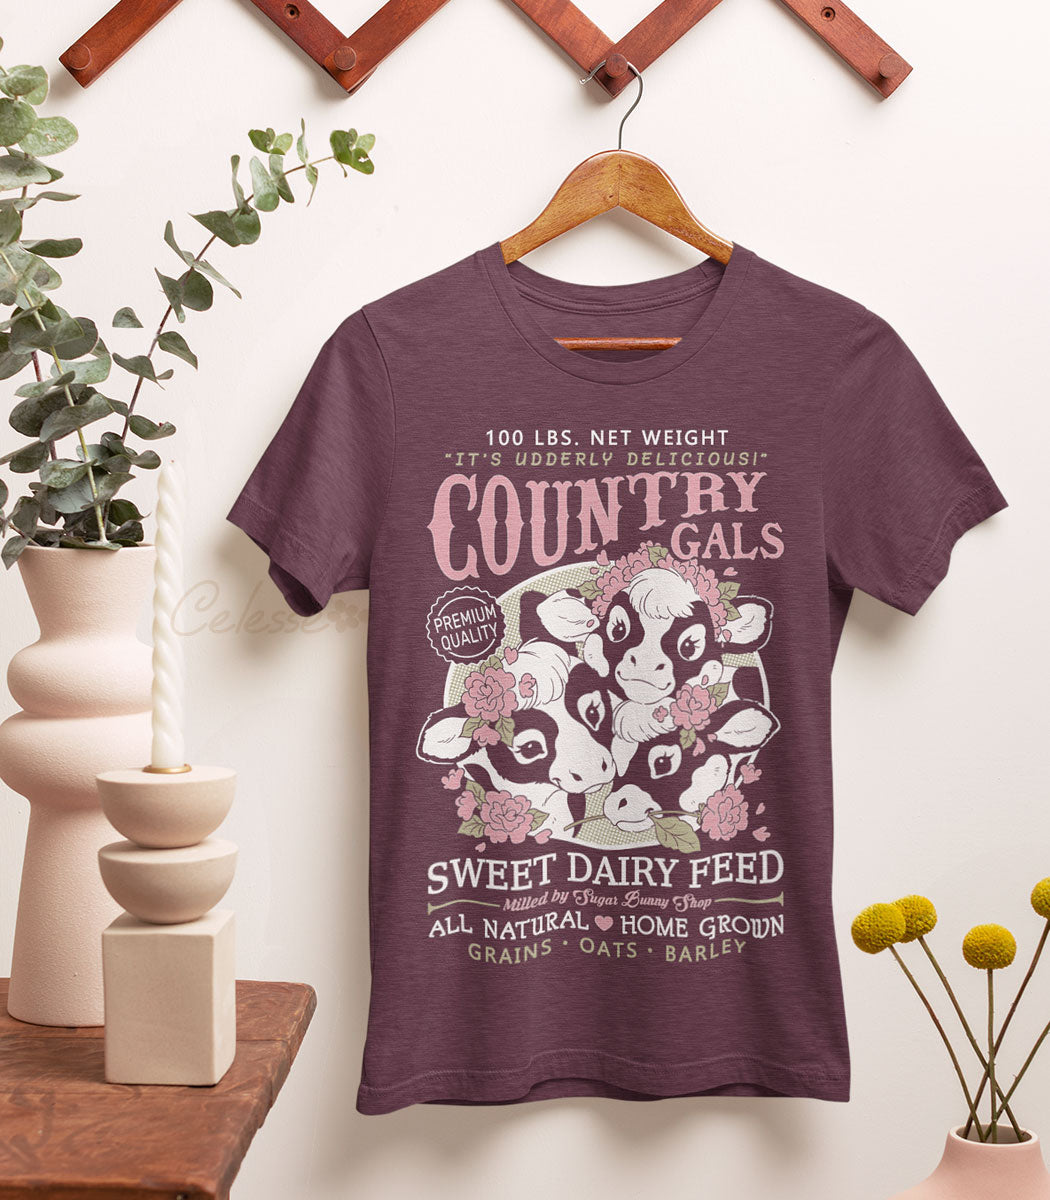 Country Gals Cows Sweet Dairy Feed Shirt